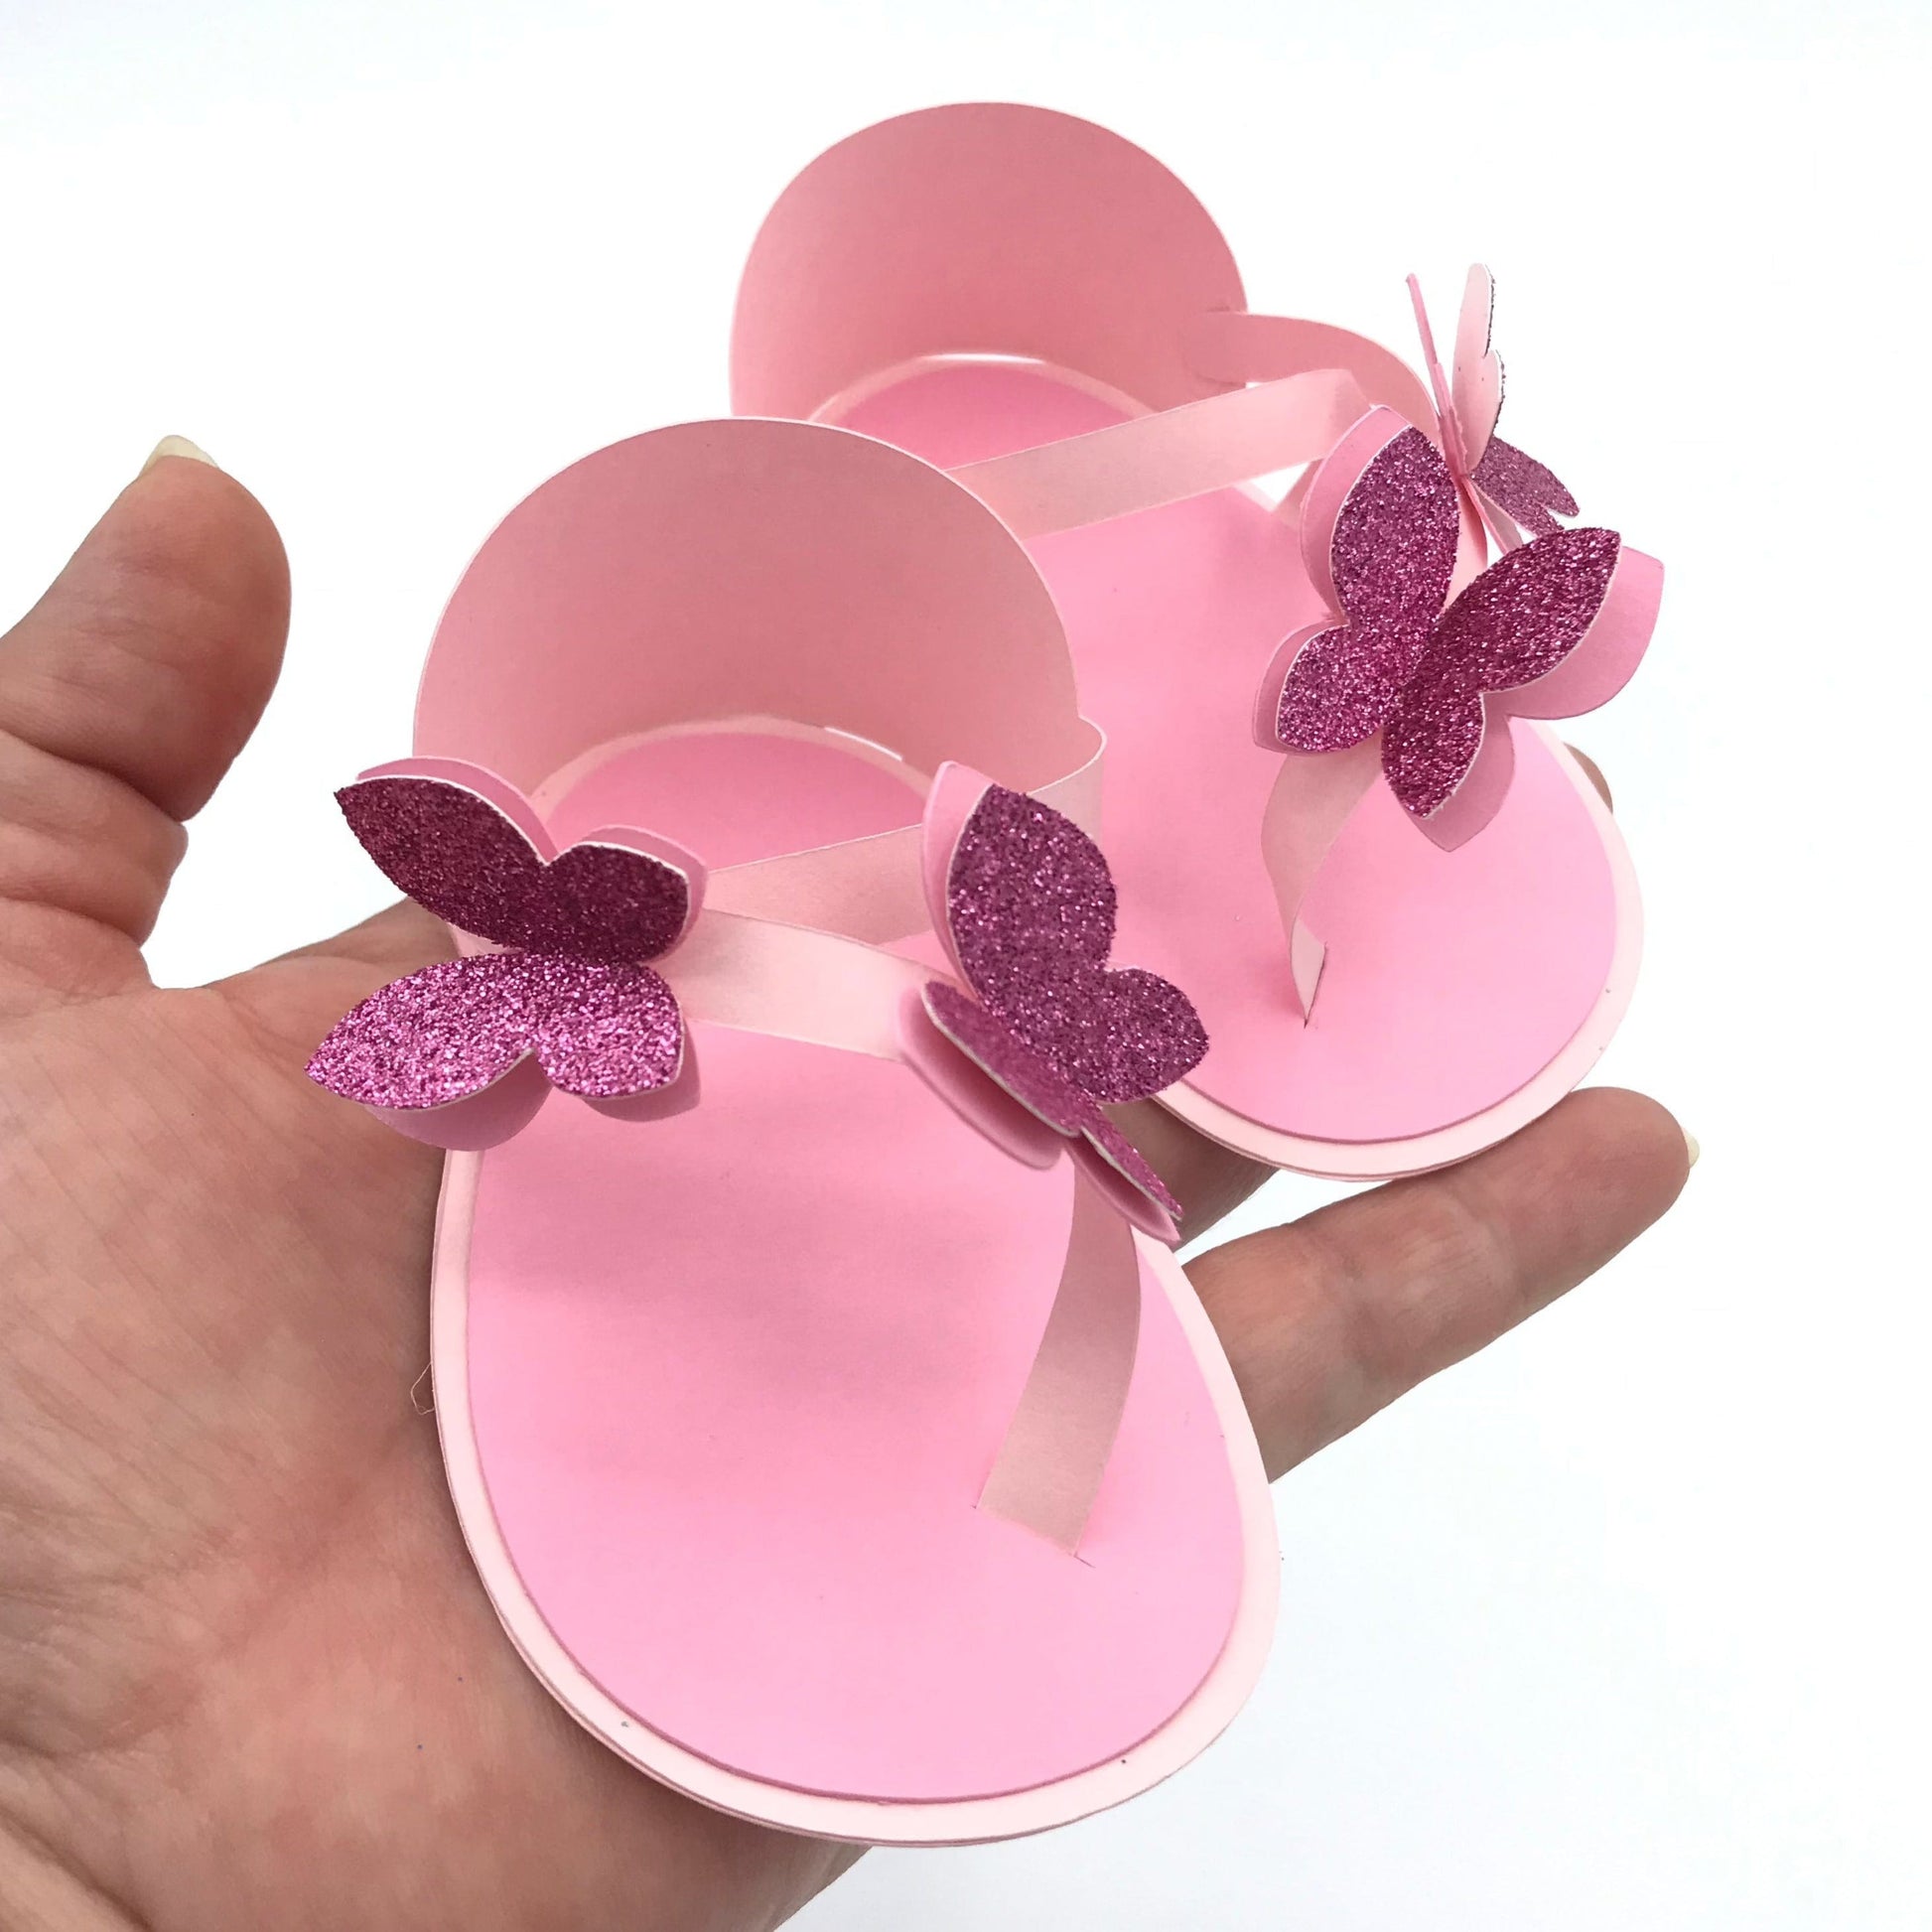 Adriana Ortiz Designs Baby Shower Favors Baby Shower Favors - Handcrafted Paper Sandals for Memorable Celebrations